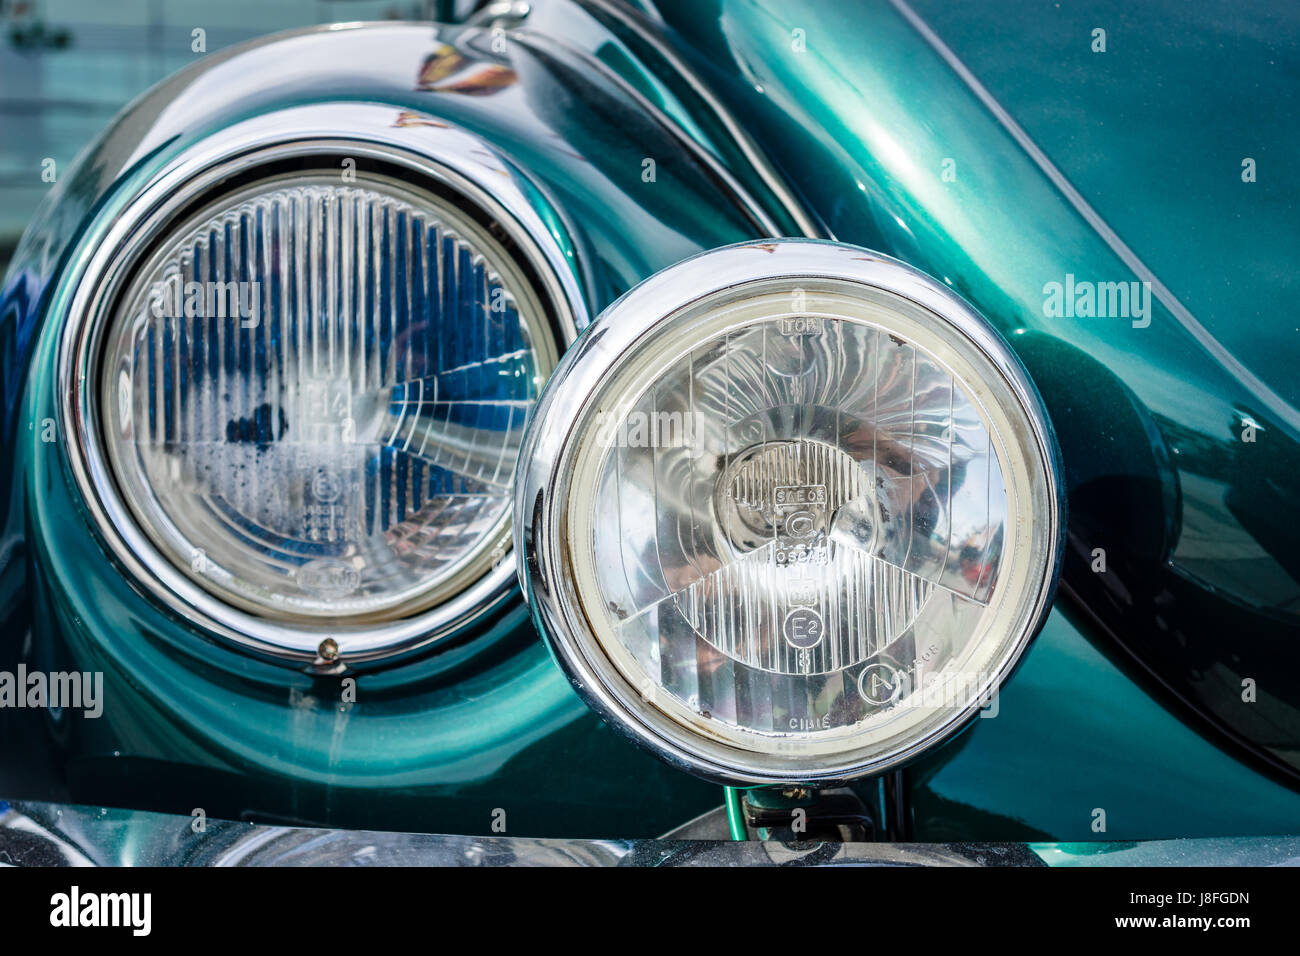 STUTTGART, GERMANY - MARCH 04, 2017: Headlamp of a compact car Volkswagen Beetle Cabrio, 1976. Close-up. Europe's greatest classic car exhibition 'RET Stock Photo